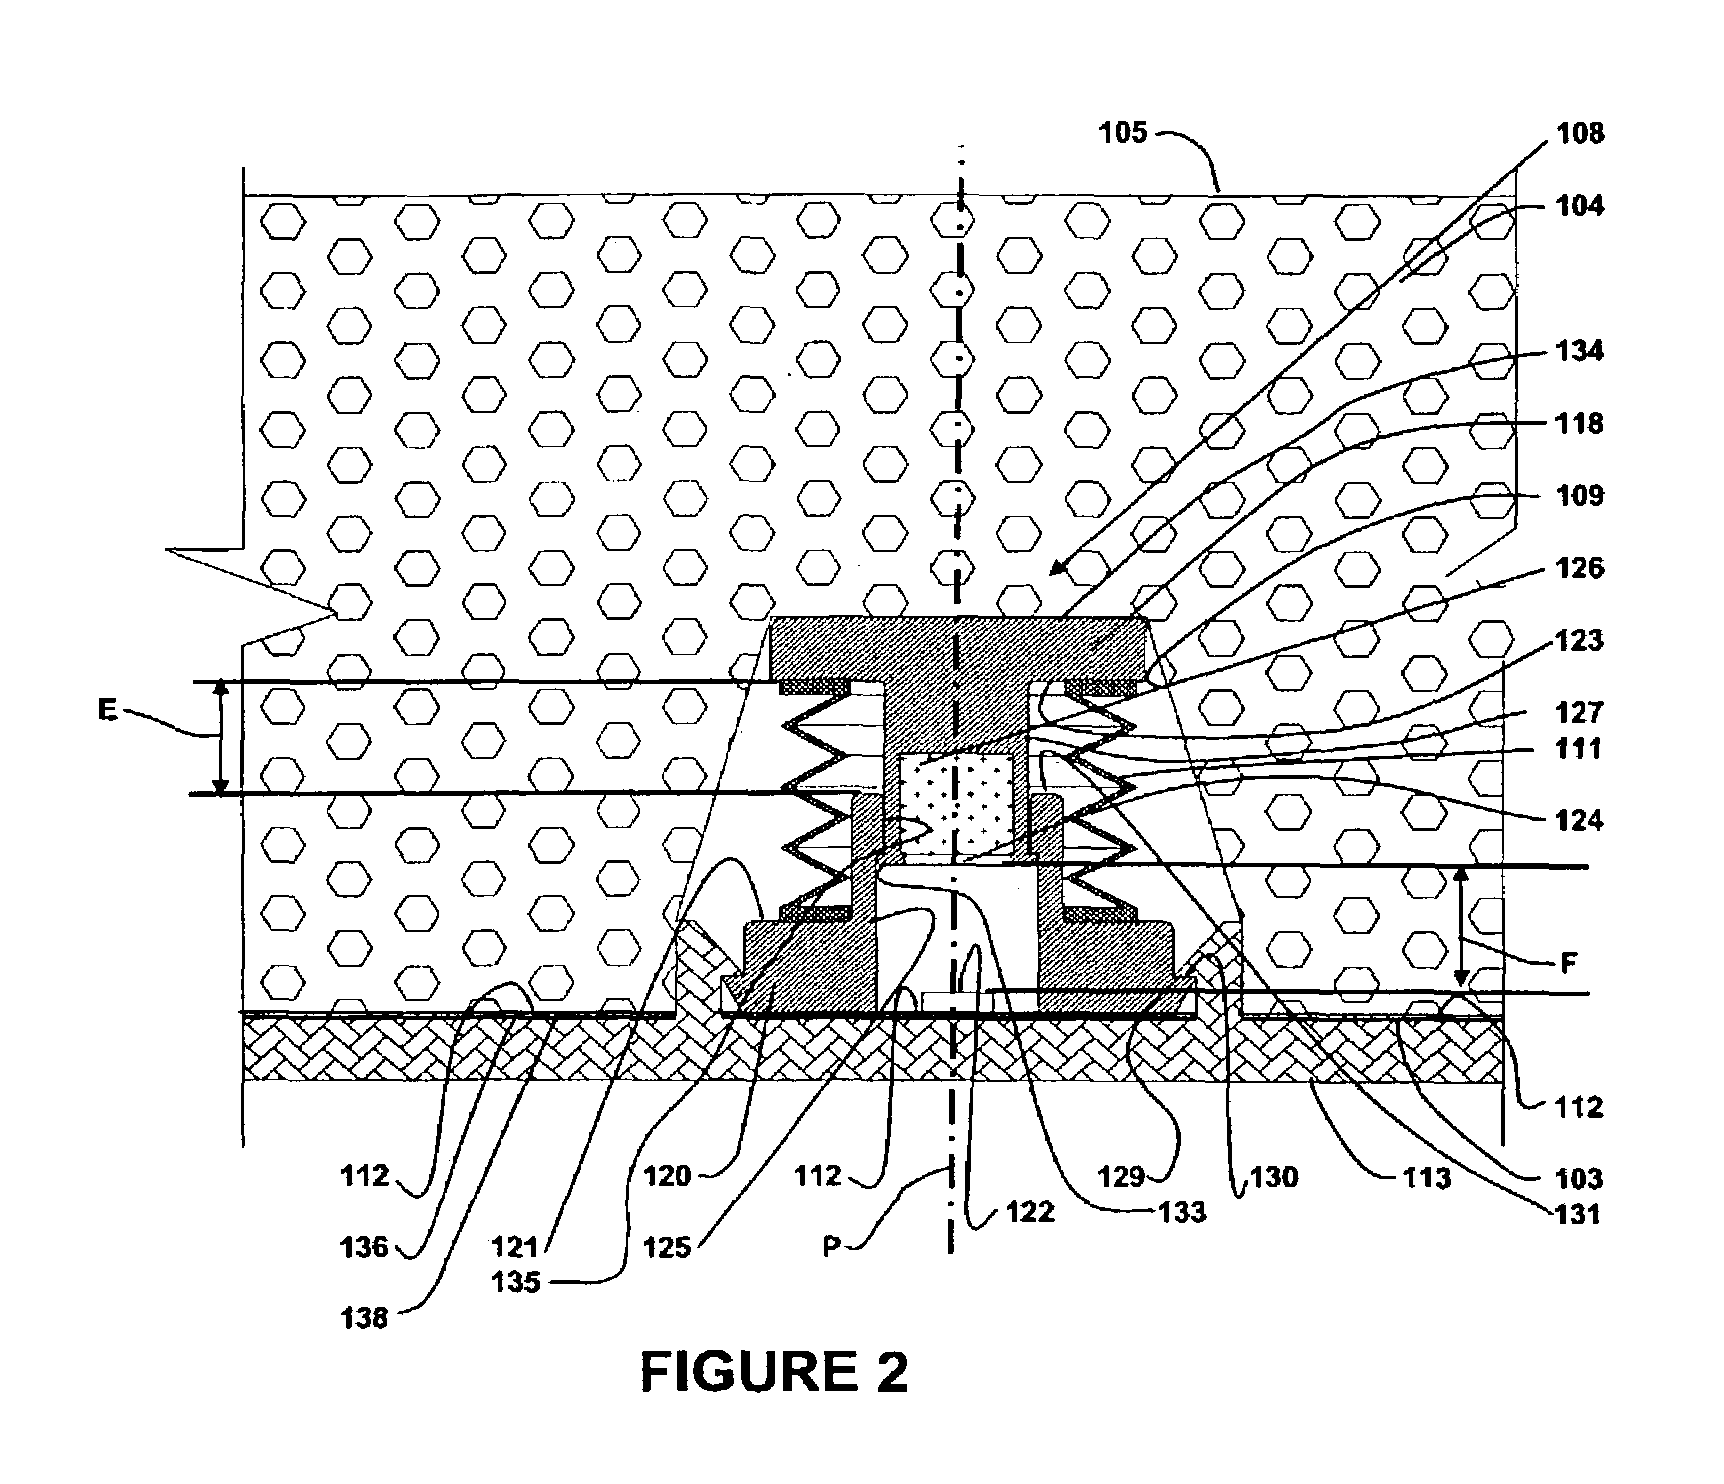 Method and apparatus for sensing seat occupancy